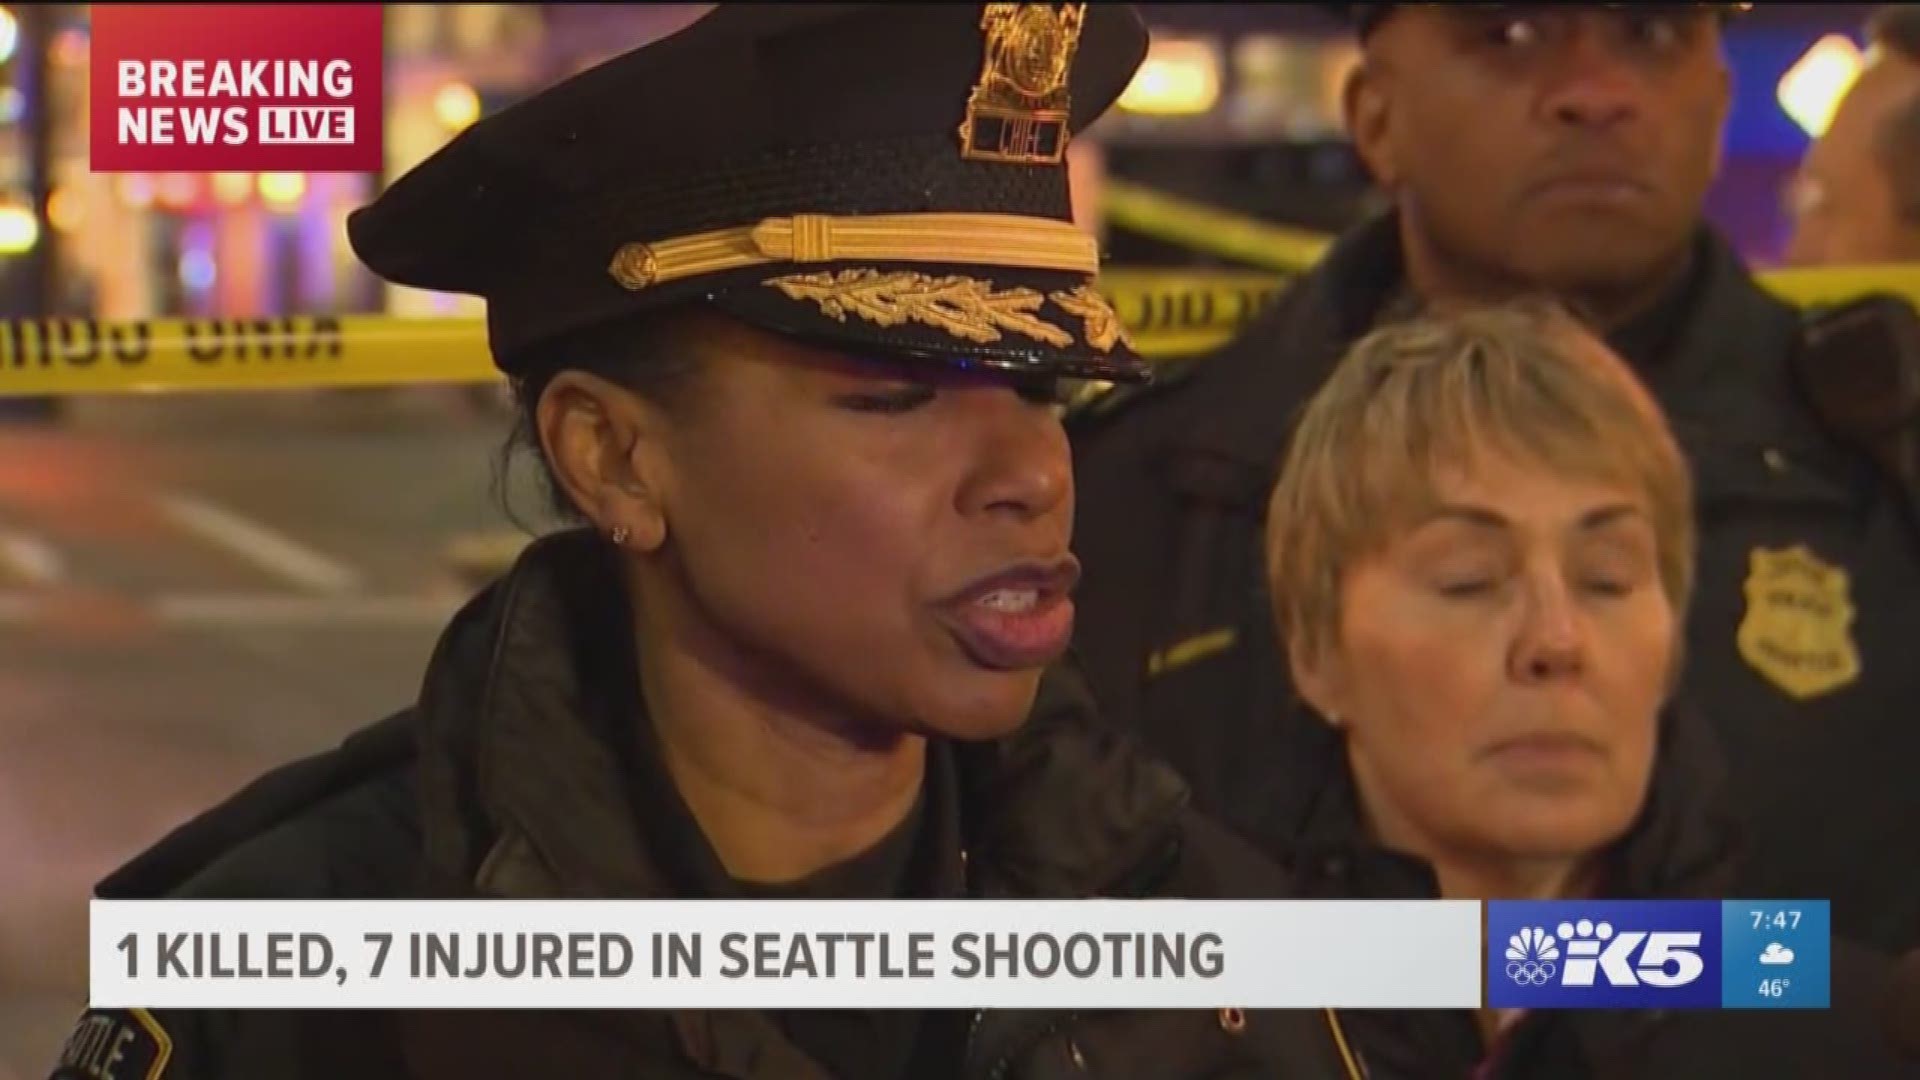 Seattle are now saying the shooting is not a random incident, and there were multiple shooters involved.